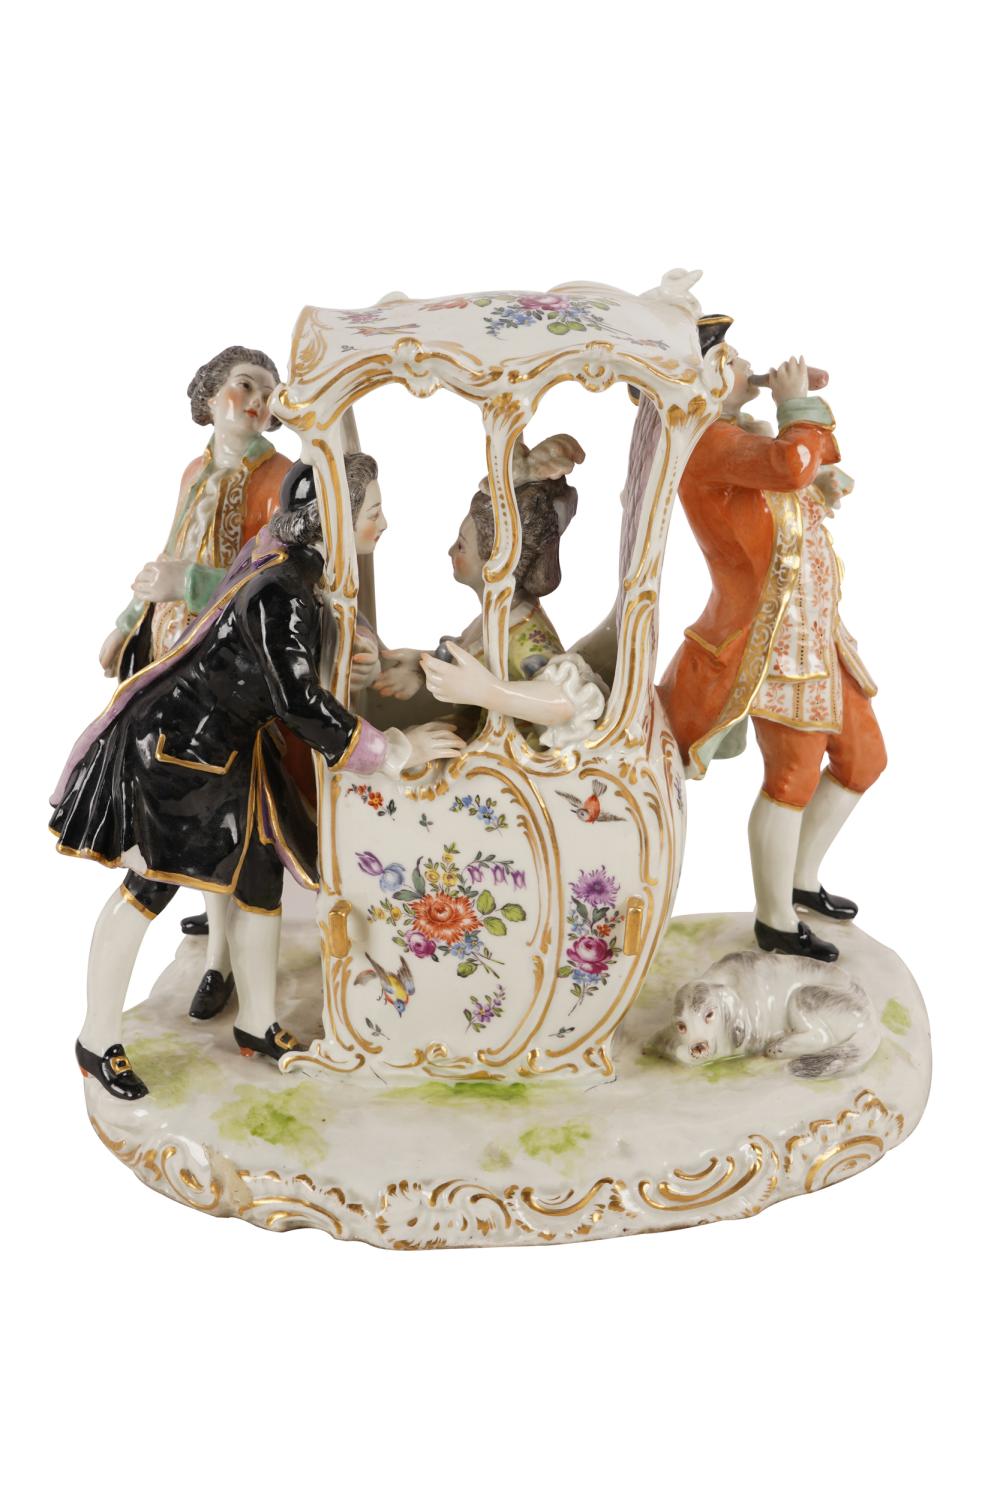 CONTINENTAL PORCELAIN CARRIAGE 332950